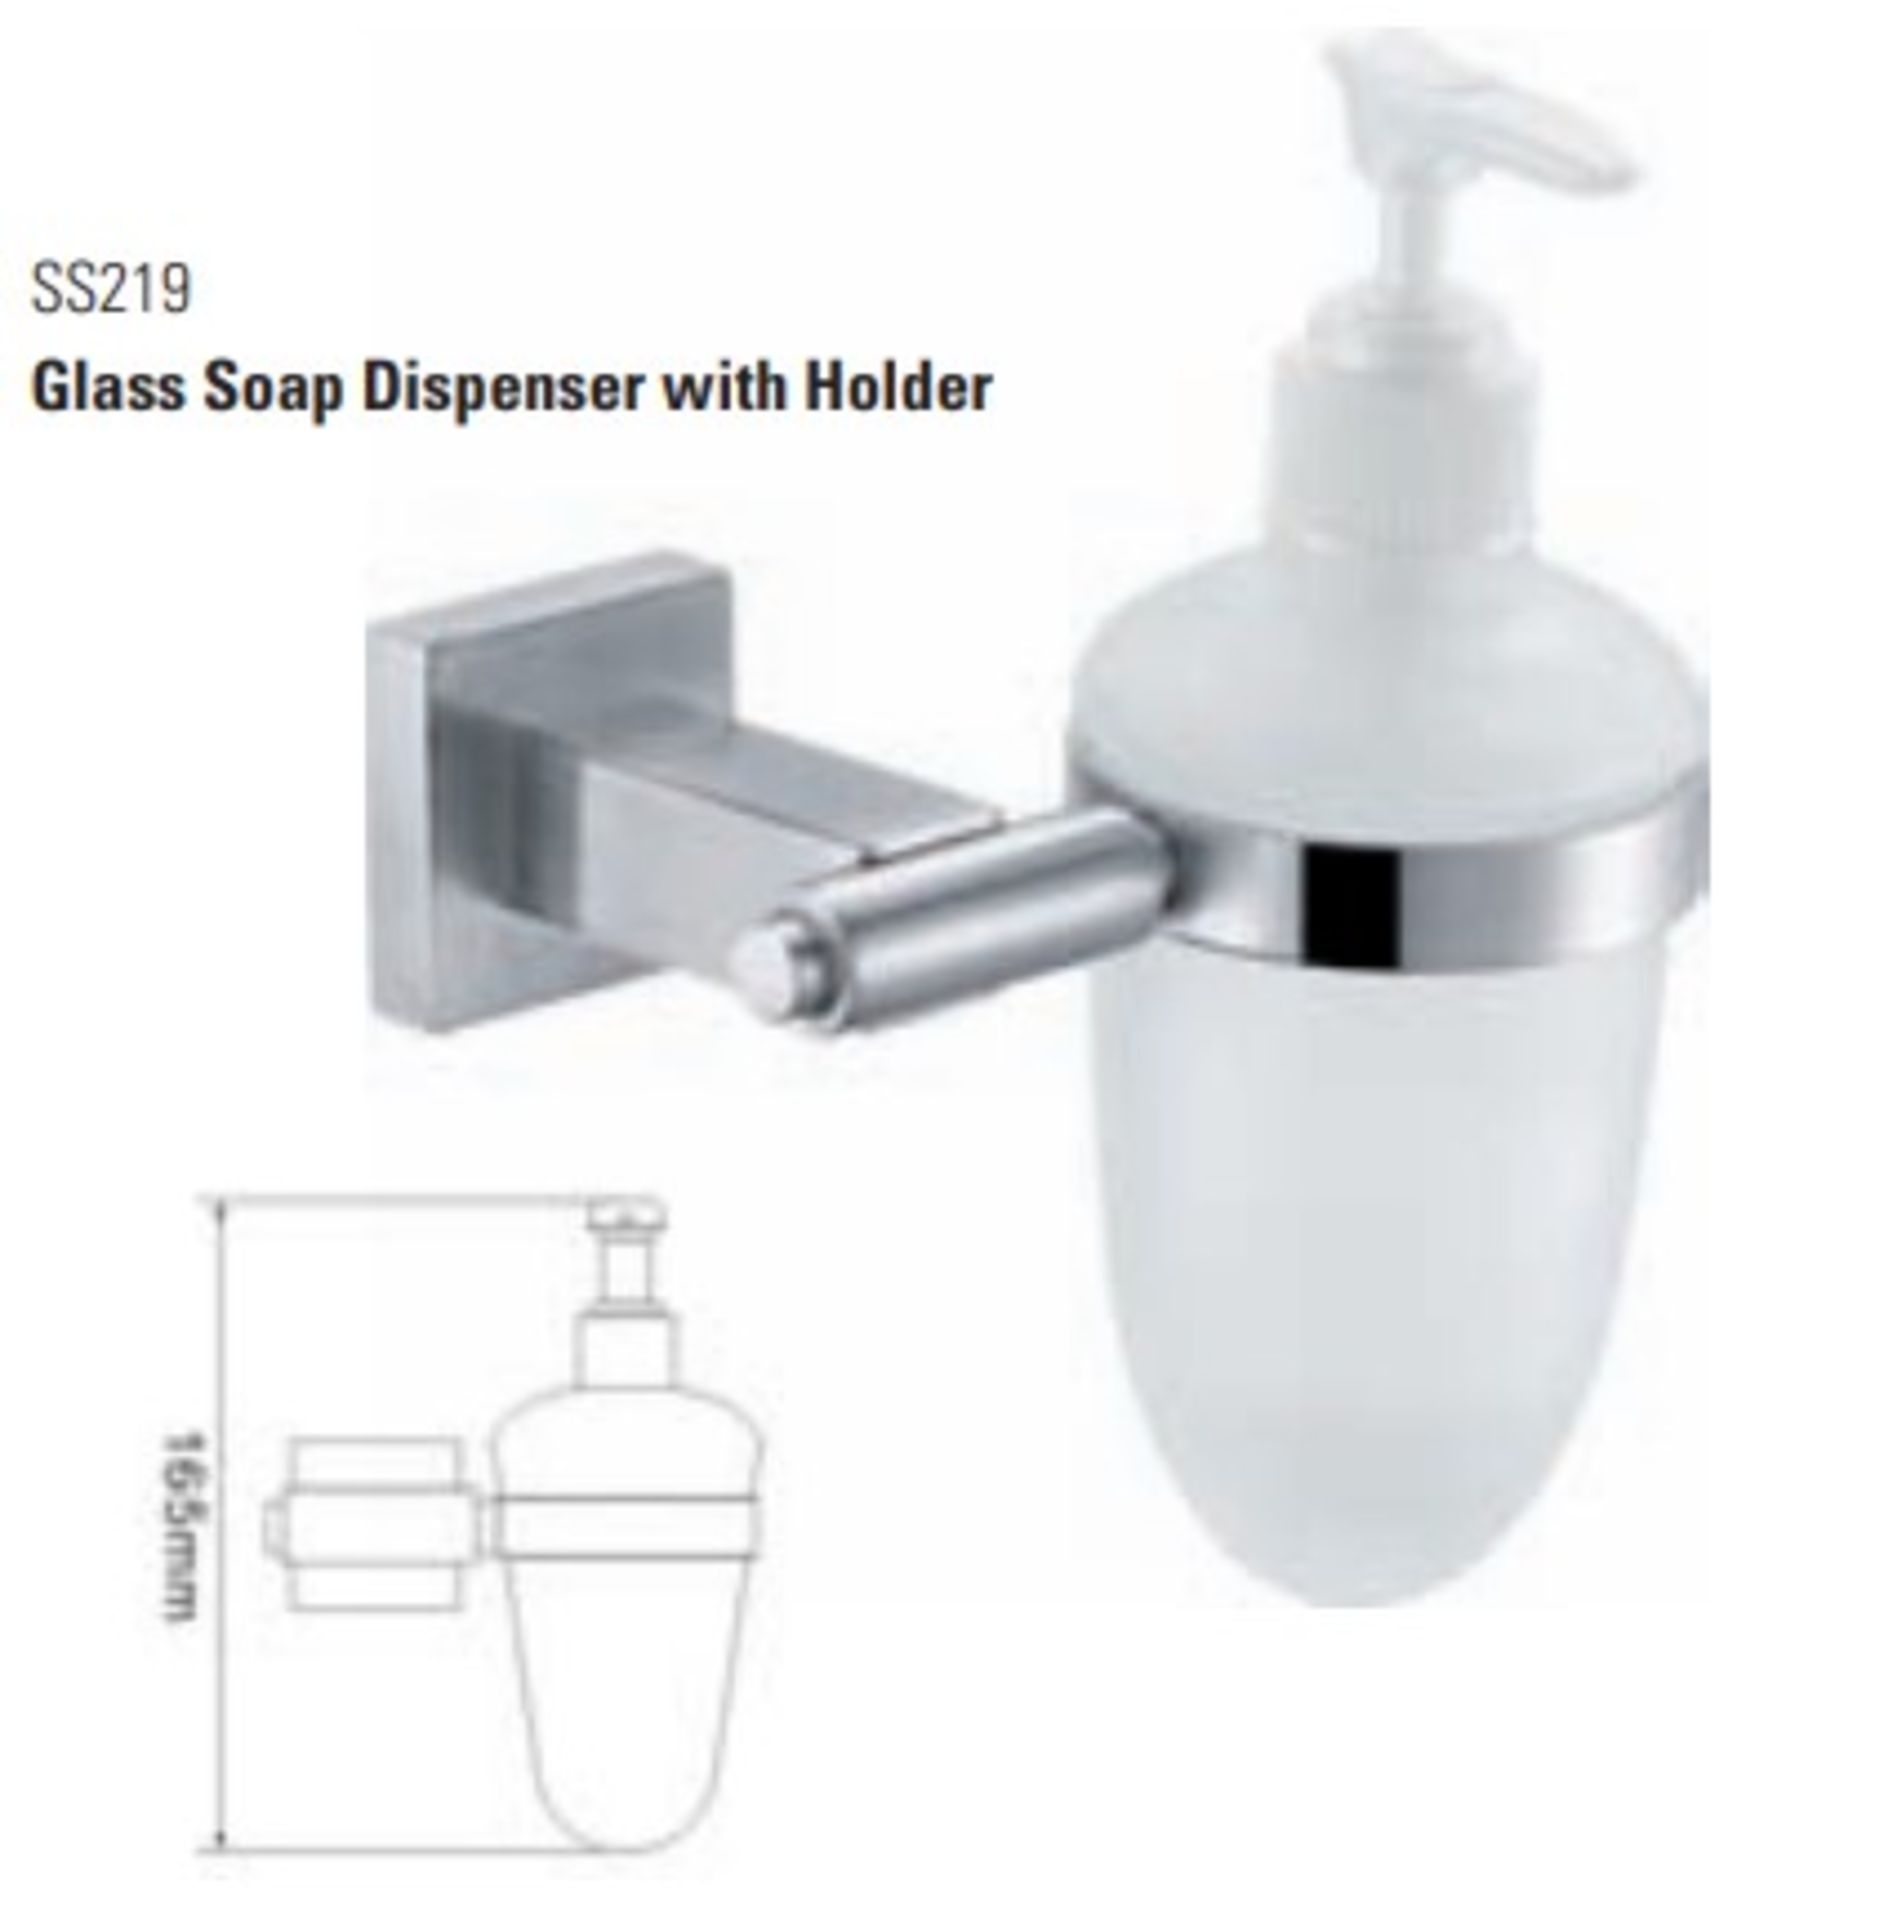 1 x Stonearth Glass Soap Dispenser With Holder - Solid Stainless Steel Bathroom Accessory - Brand - Image 2 of 3